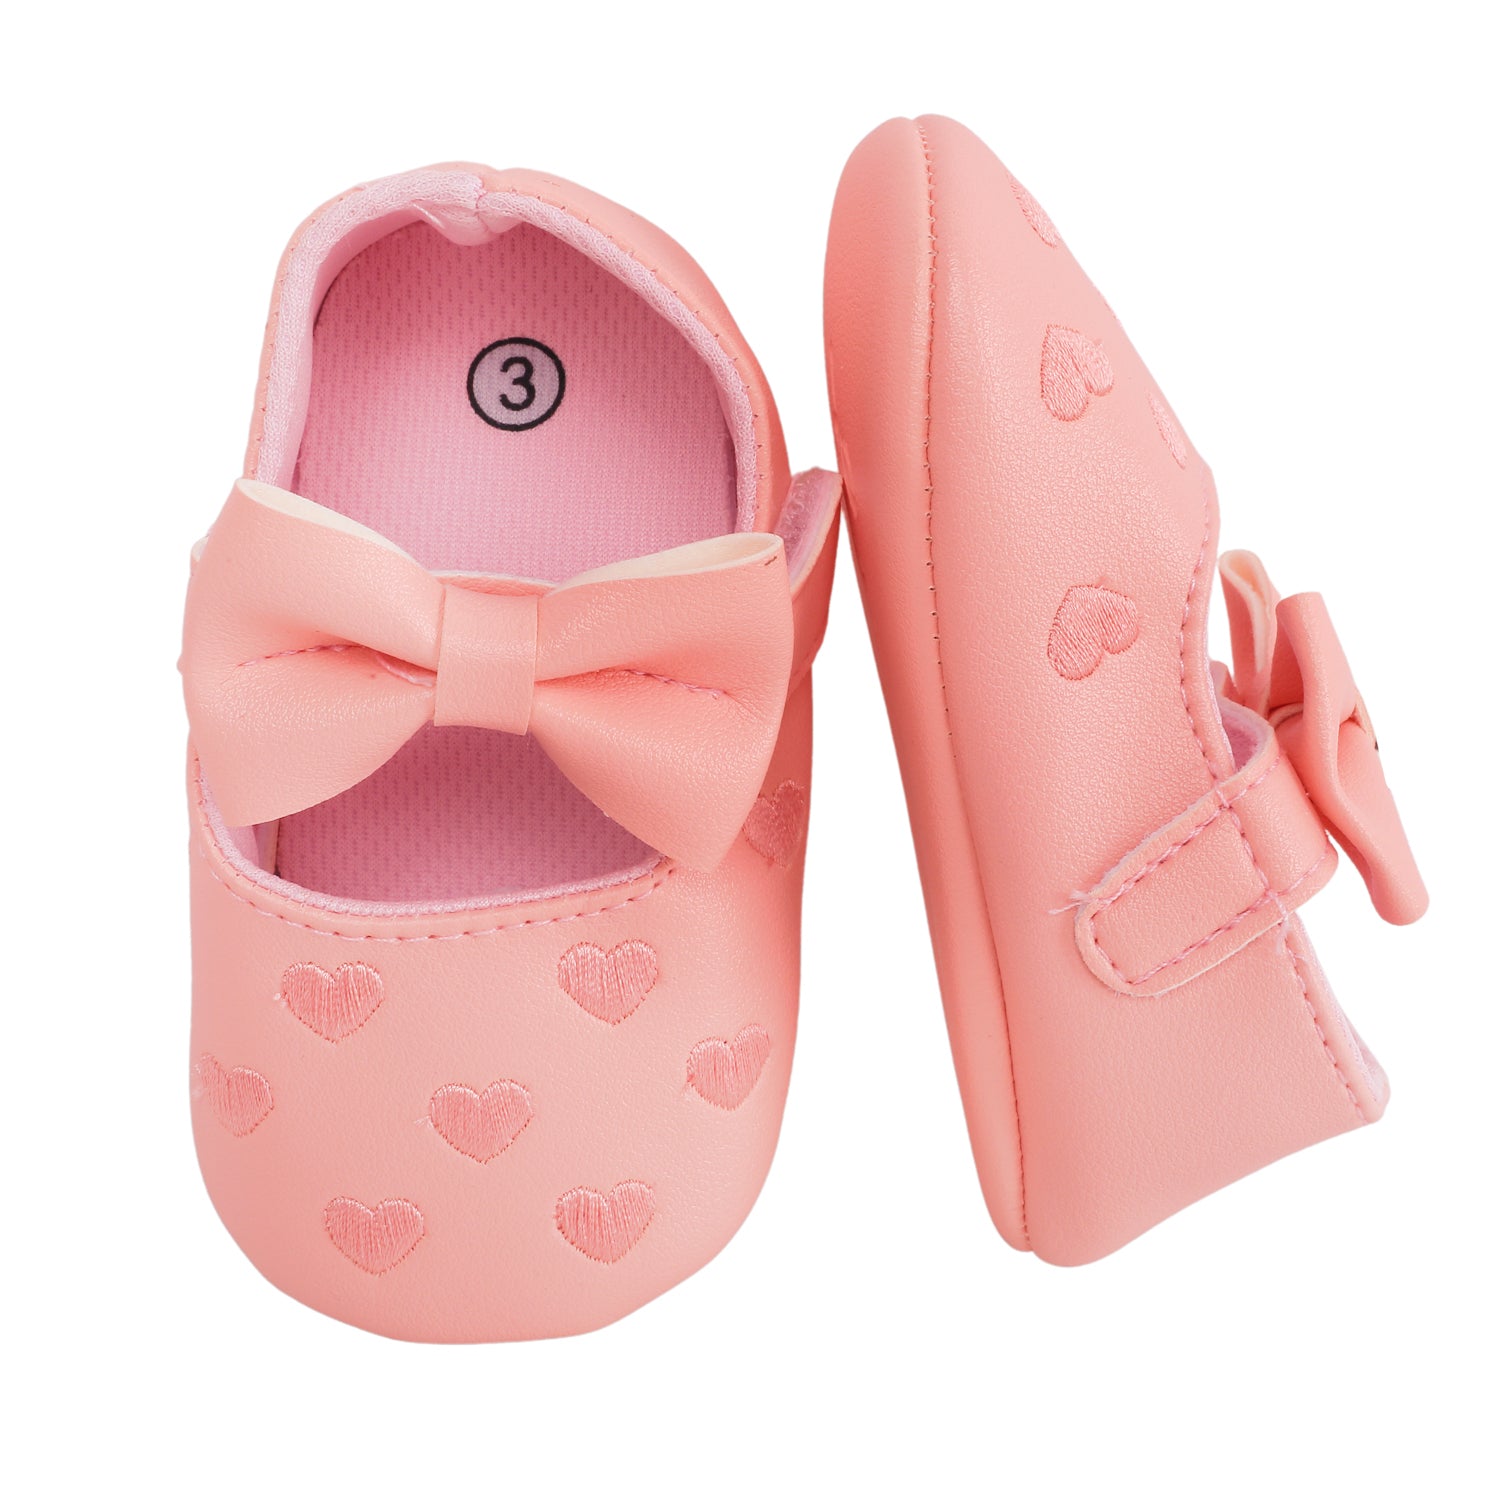 Baby Moo Hearts With Bow Pink Booties - Baby Moo